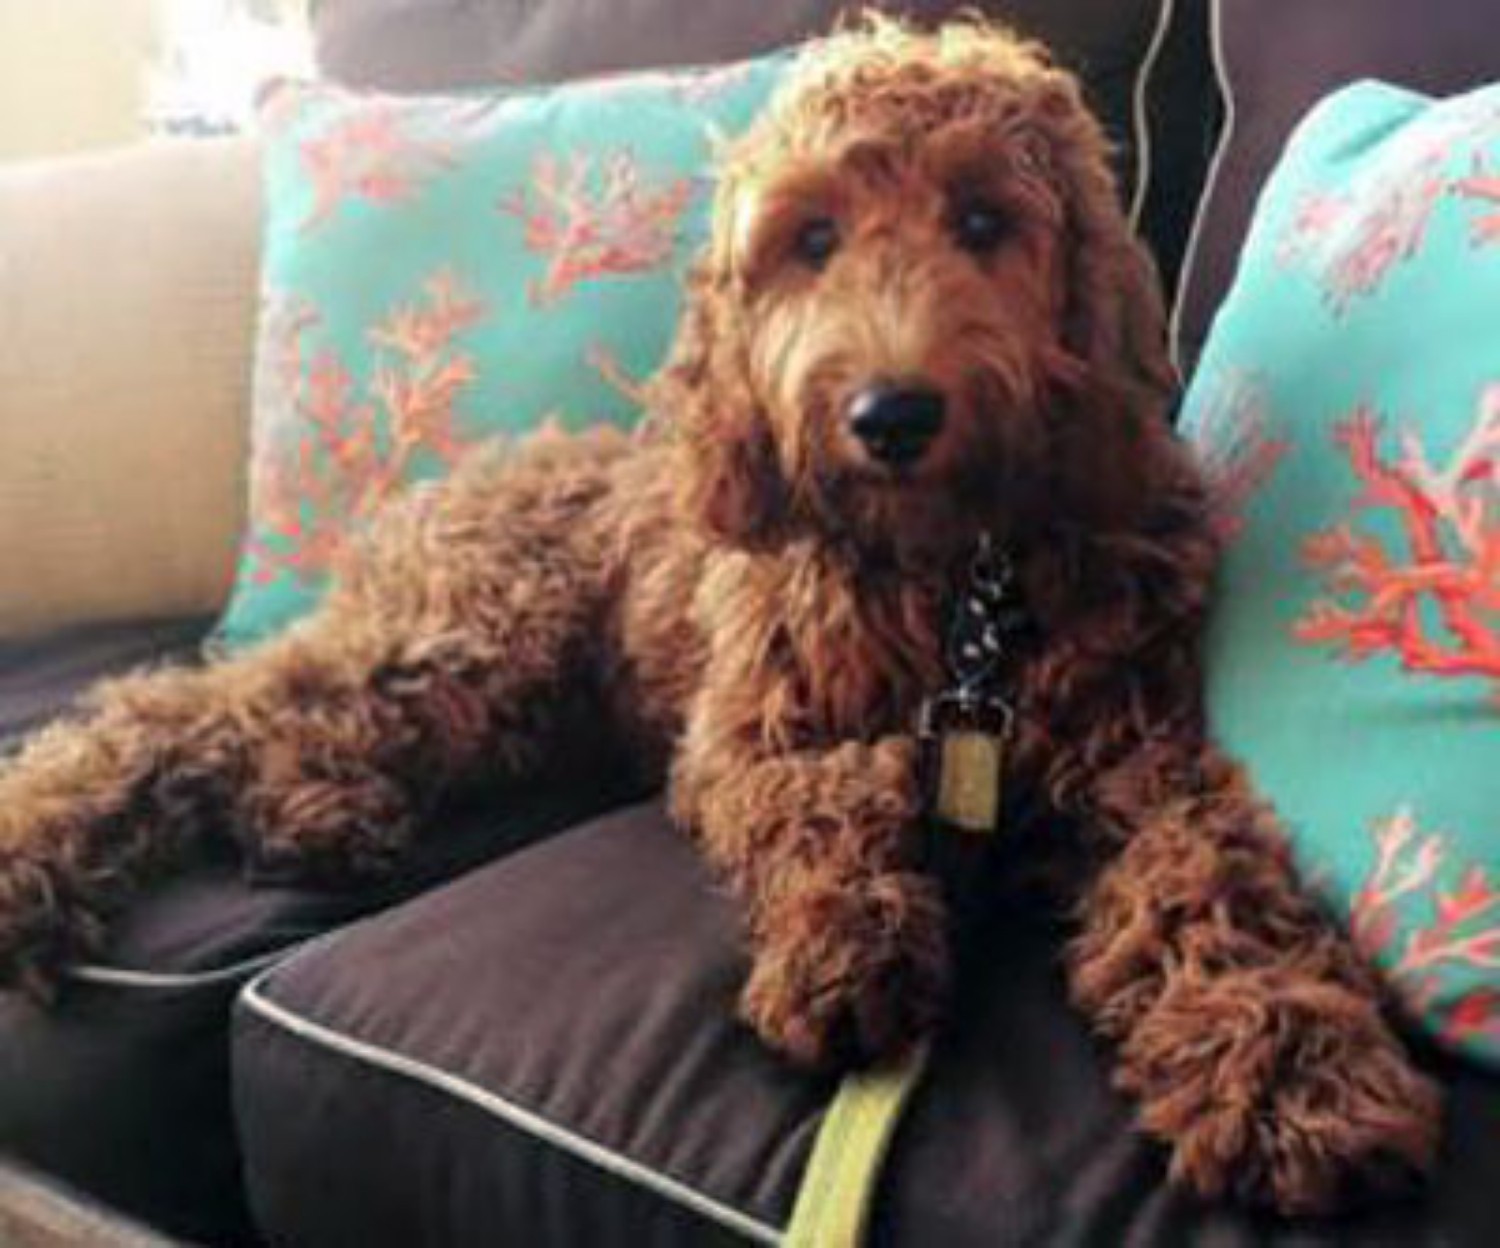 Irish Doodles are a robust, resilient breed, and with good care they can li...